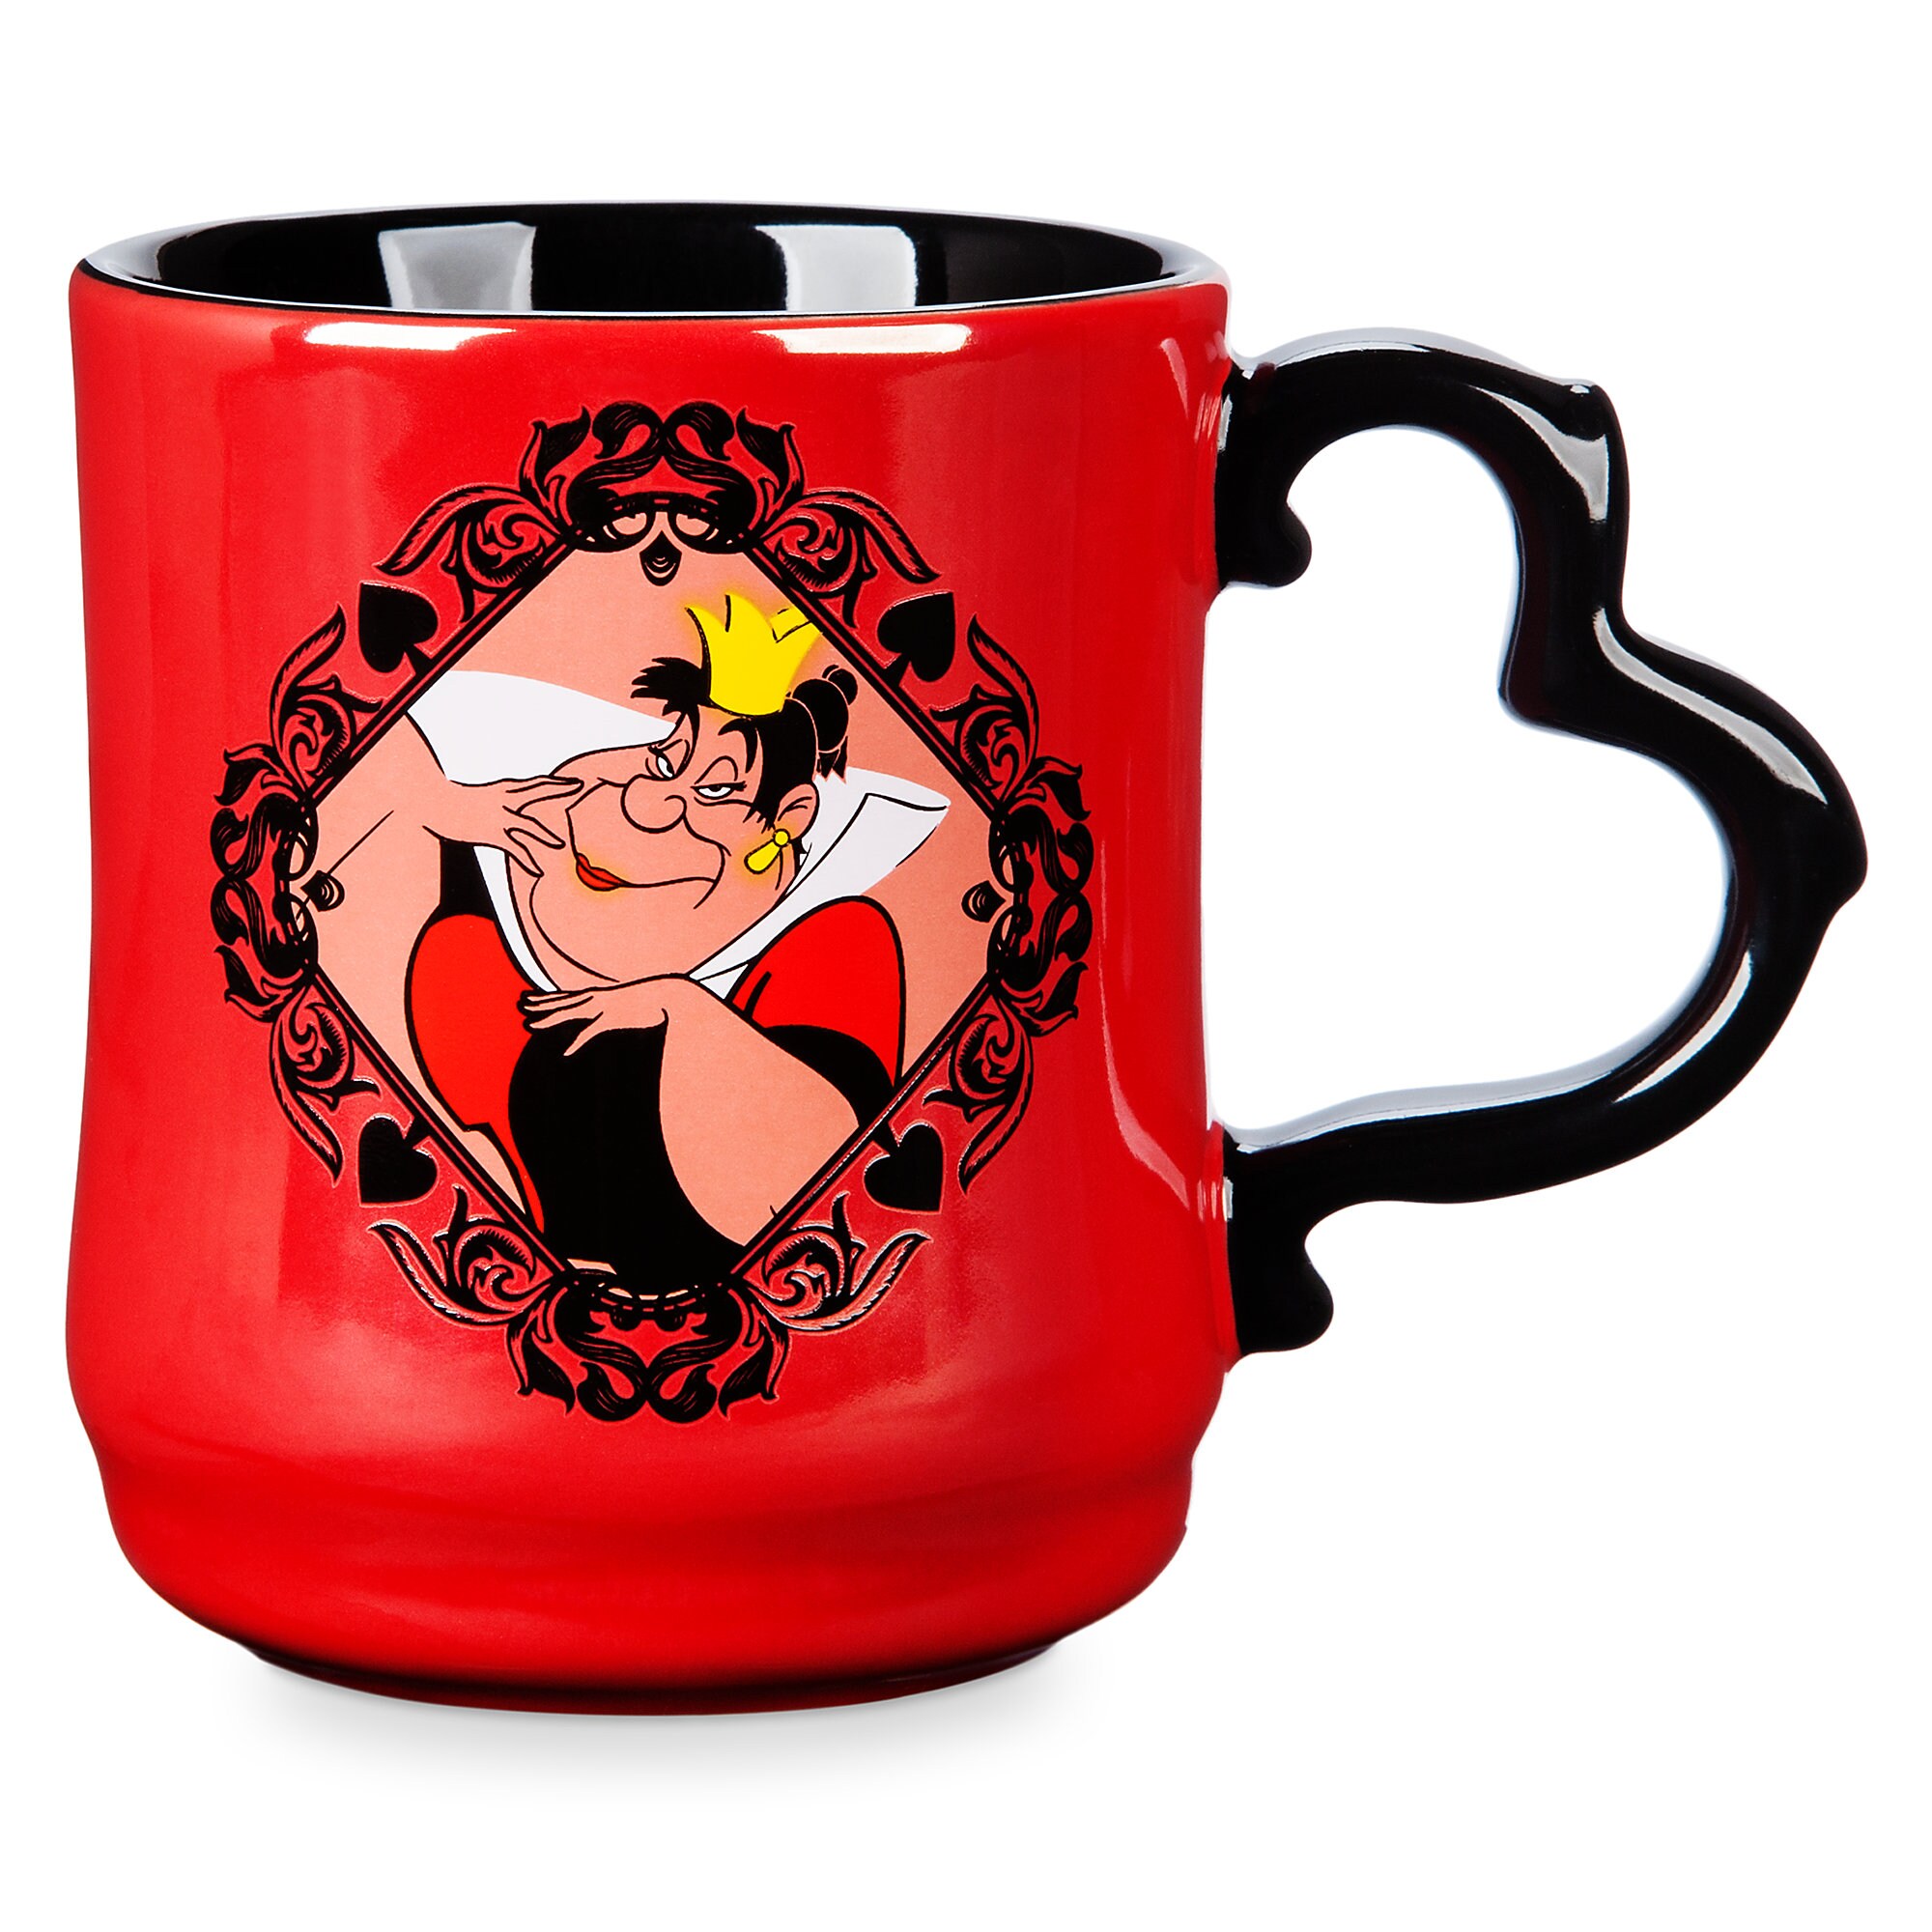 Queen of Hearts Mug - Alice in Wonderland - Disney Villains now out ...